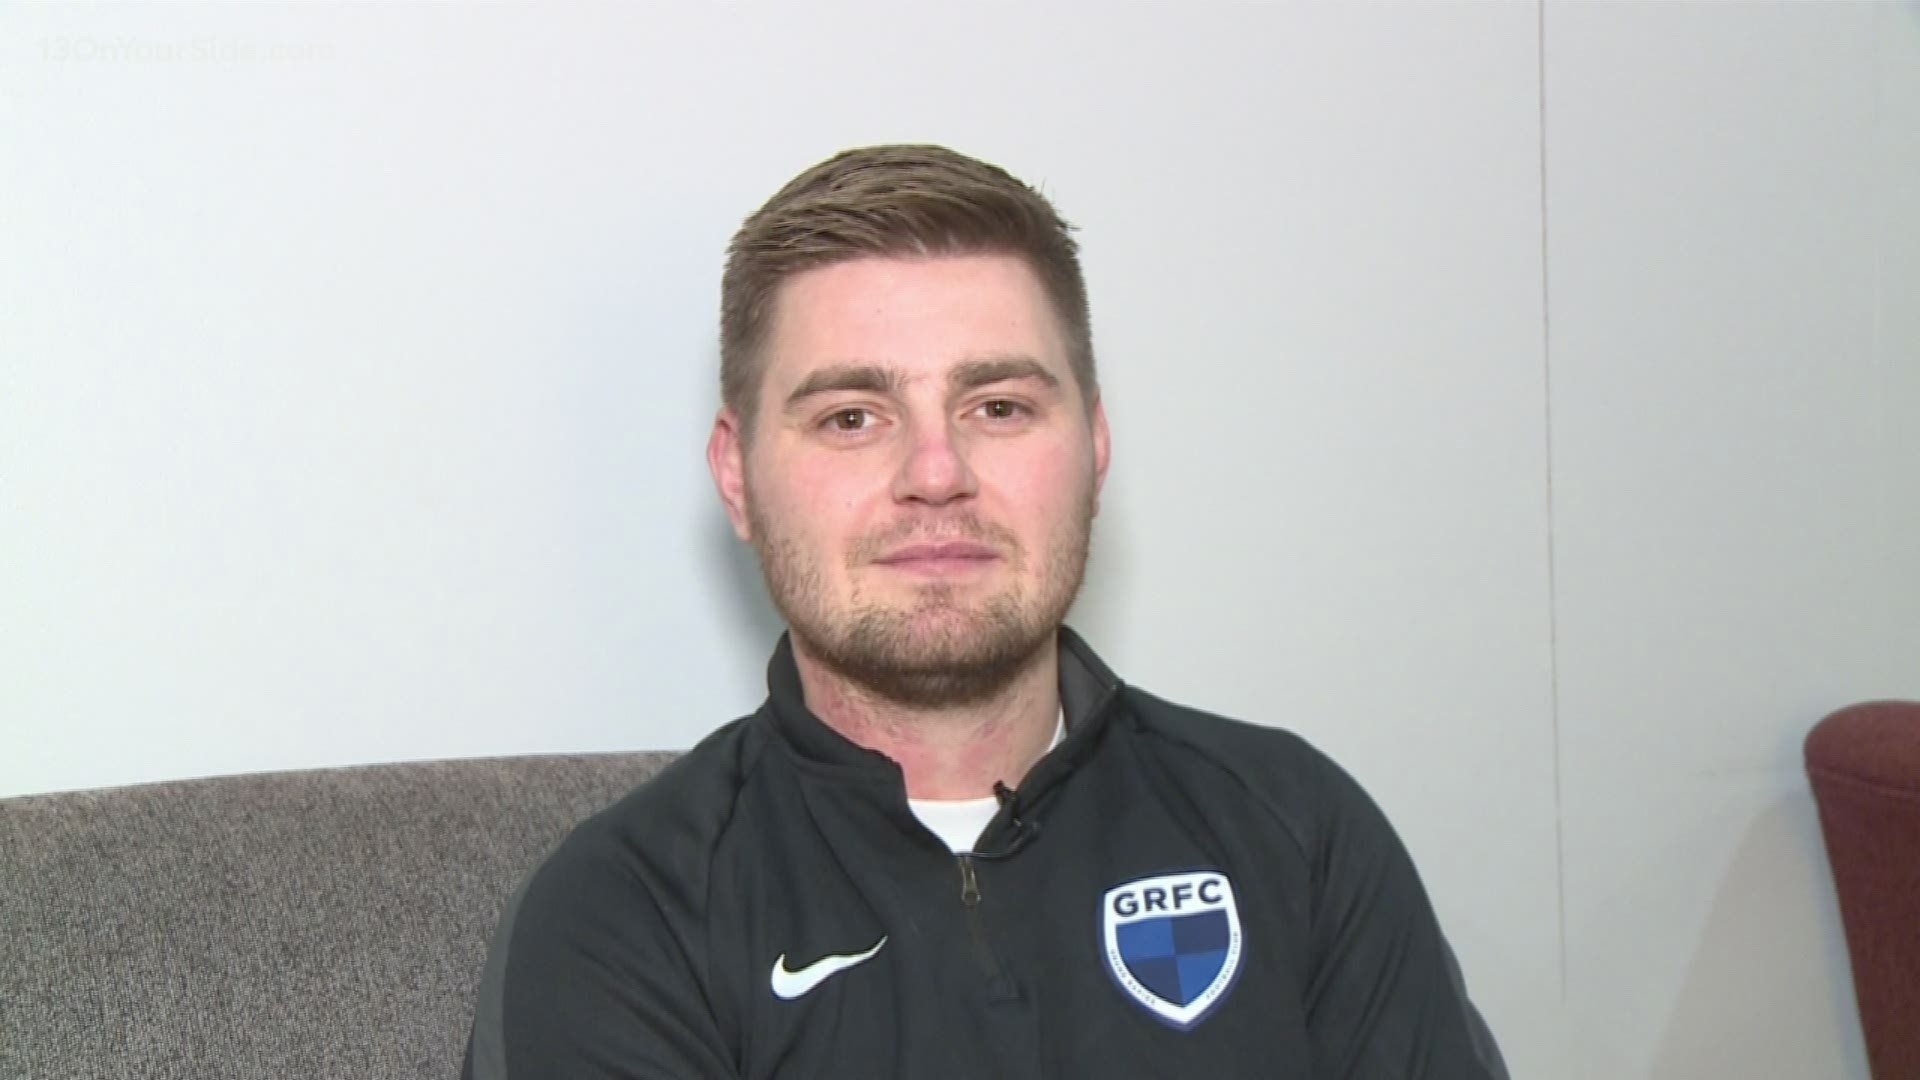 The new head coach is 29-year-old James Gilpin and he joins the men's team after two years as head coach of the GRFC women.